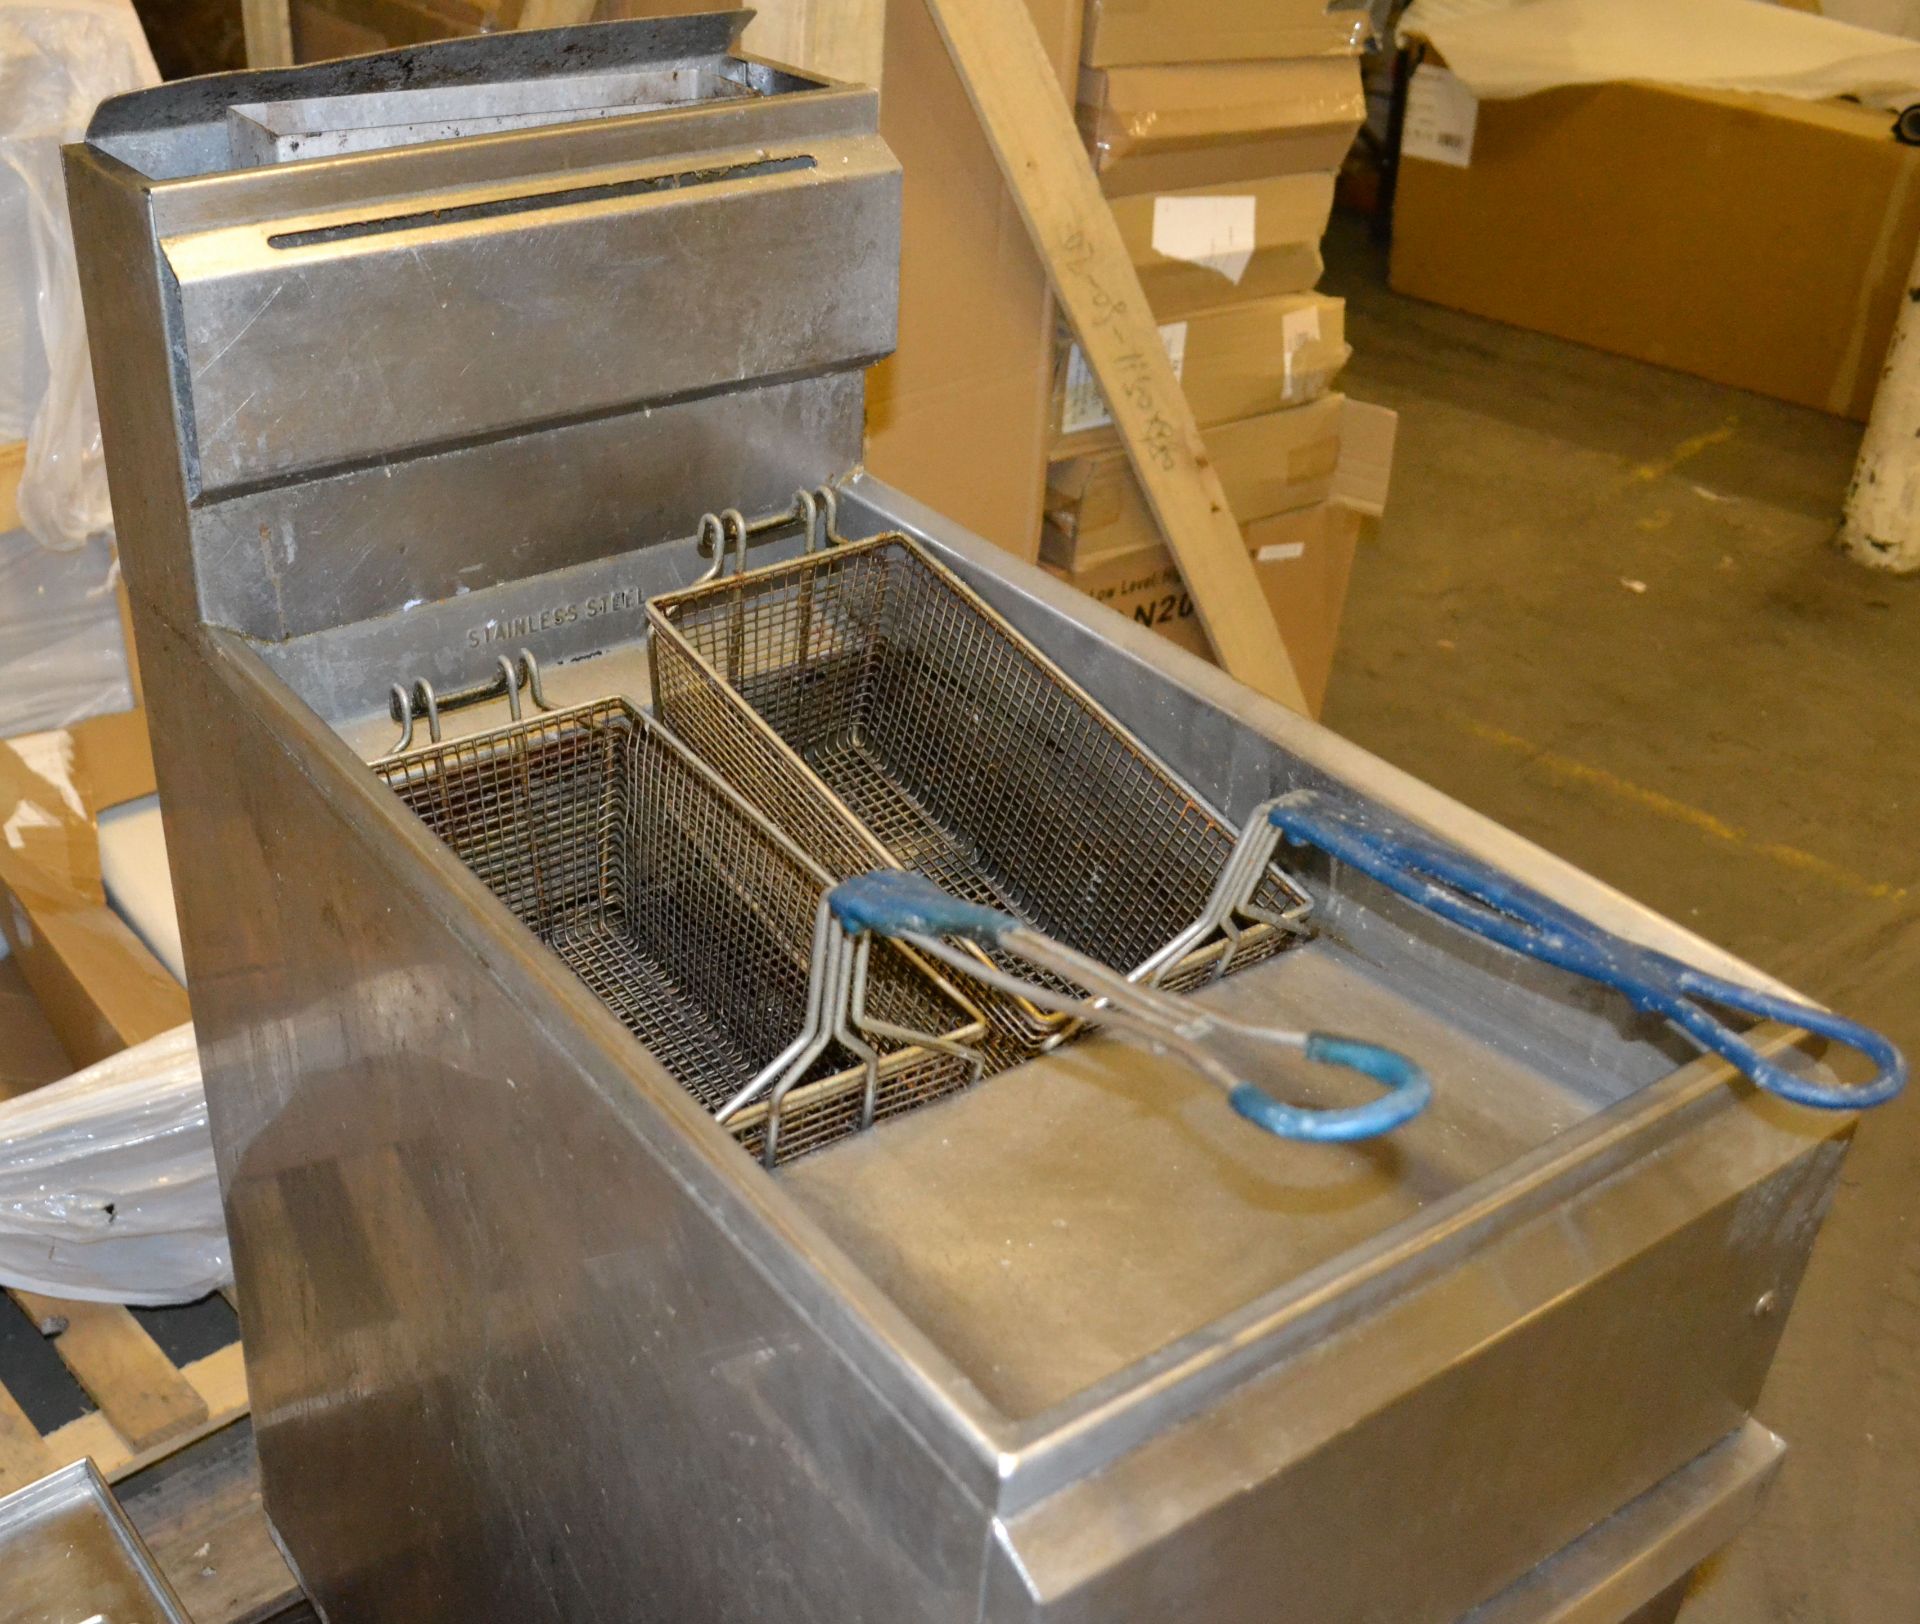 1 x Elite IFS-40 Free Standing Twin Basket Gas Fryer - Ref: FJC009 - CL124 - Location: Bolton - Image 2 of 6